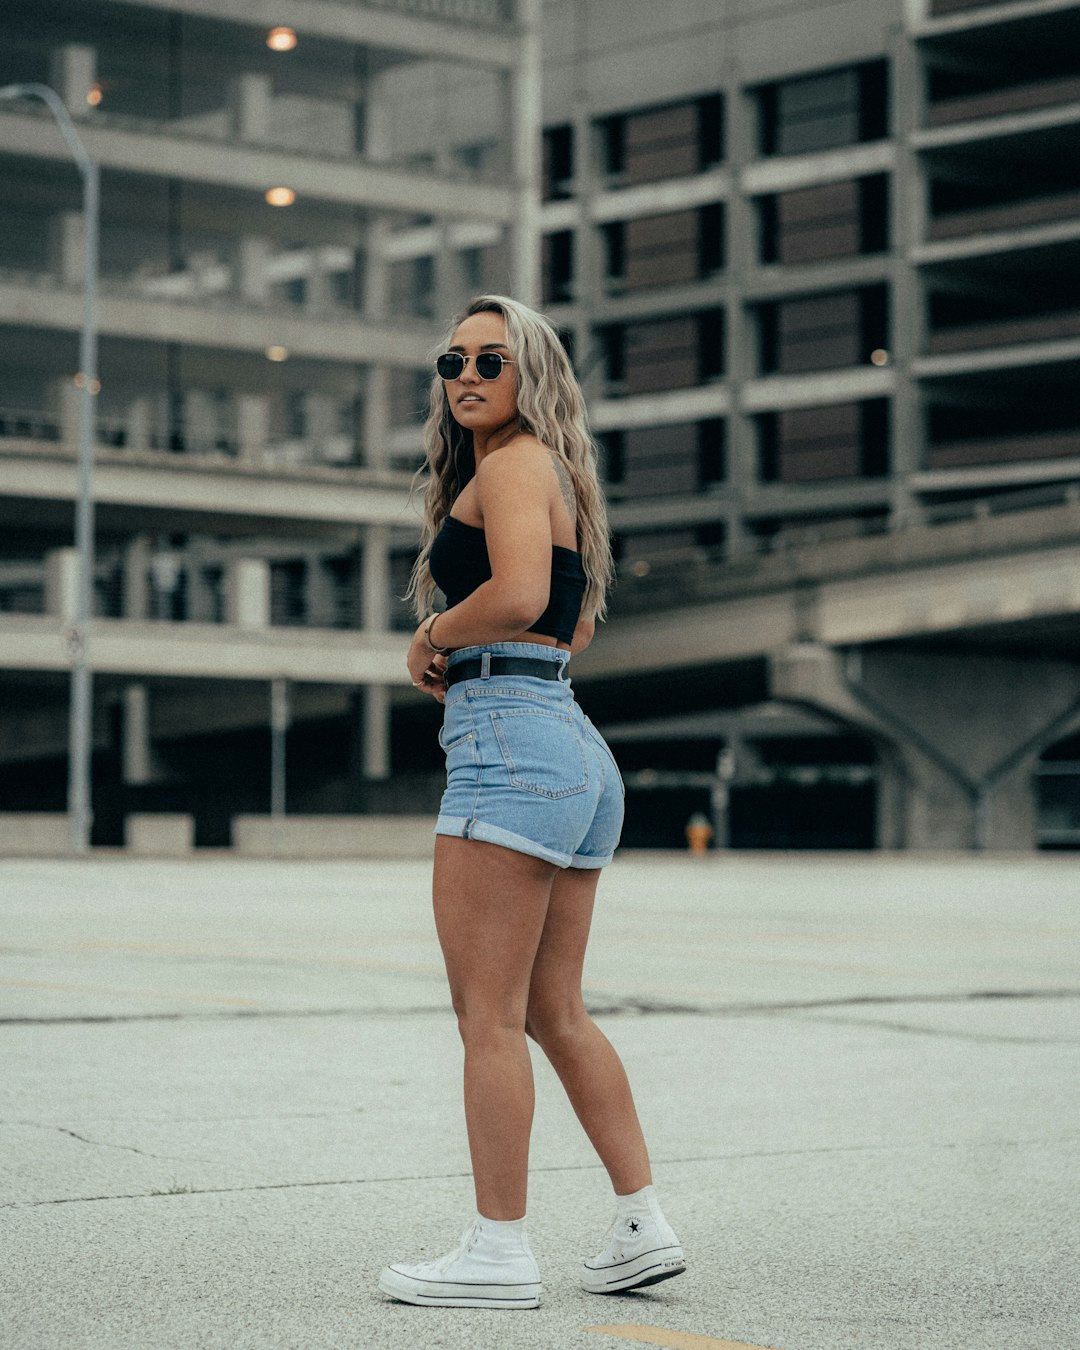 woman in blue denim shorts and white sunglasses standing on white concrete floor during daytime